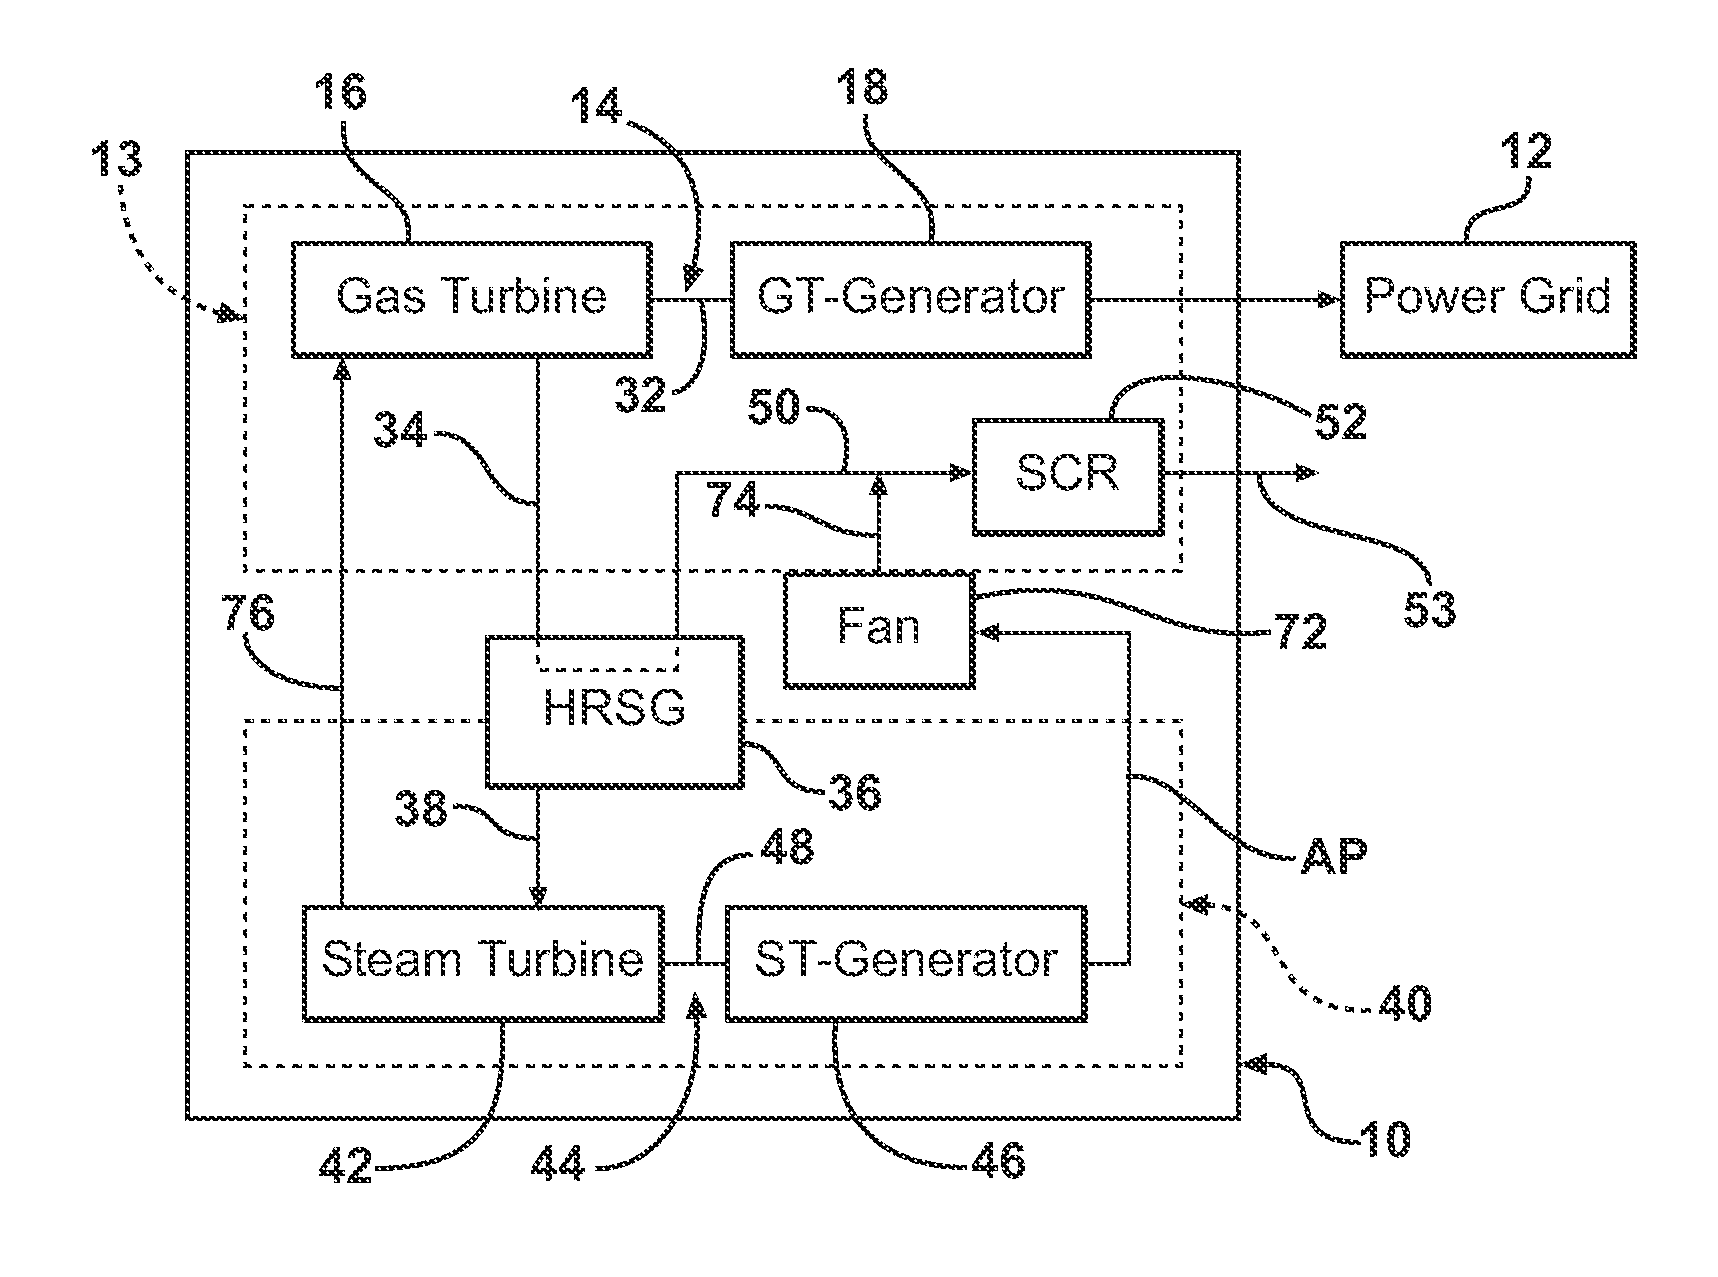 Method of Operating a Gas Turbine Power Plant with Auxiliary Power to Reduce Emissions